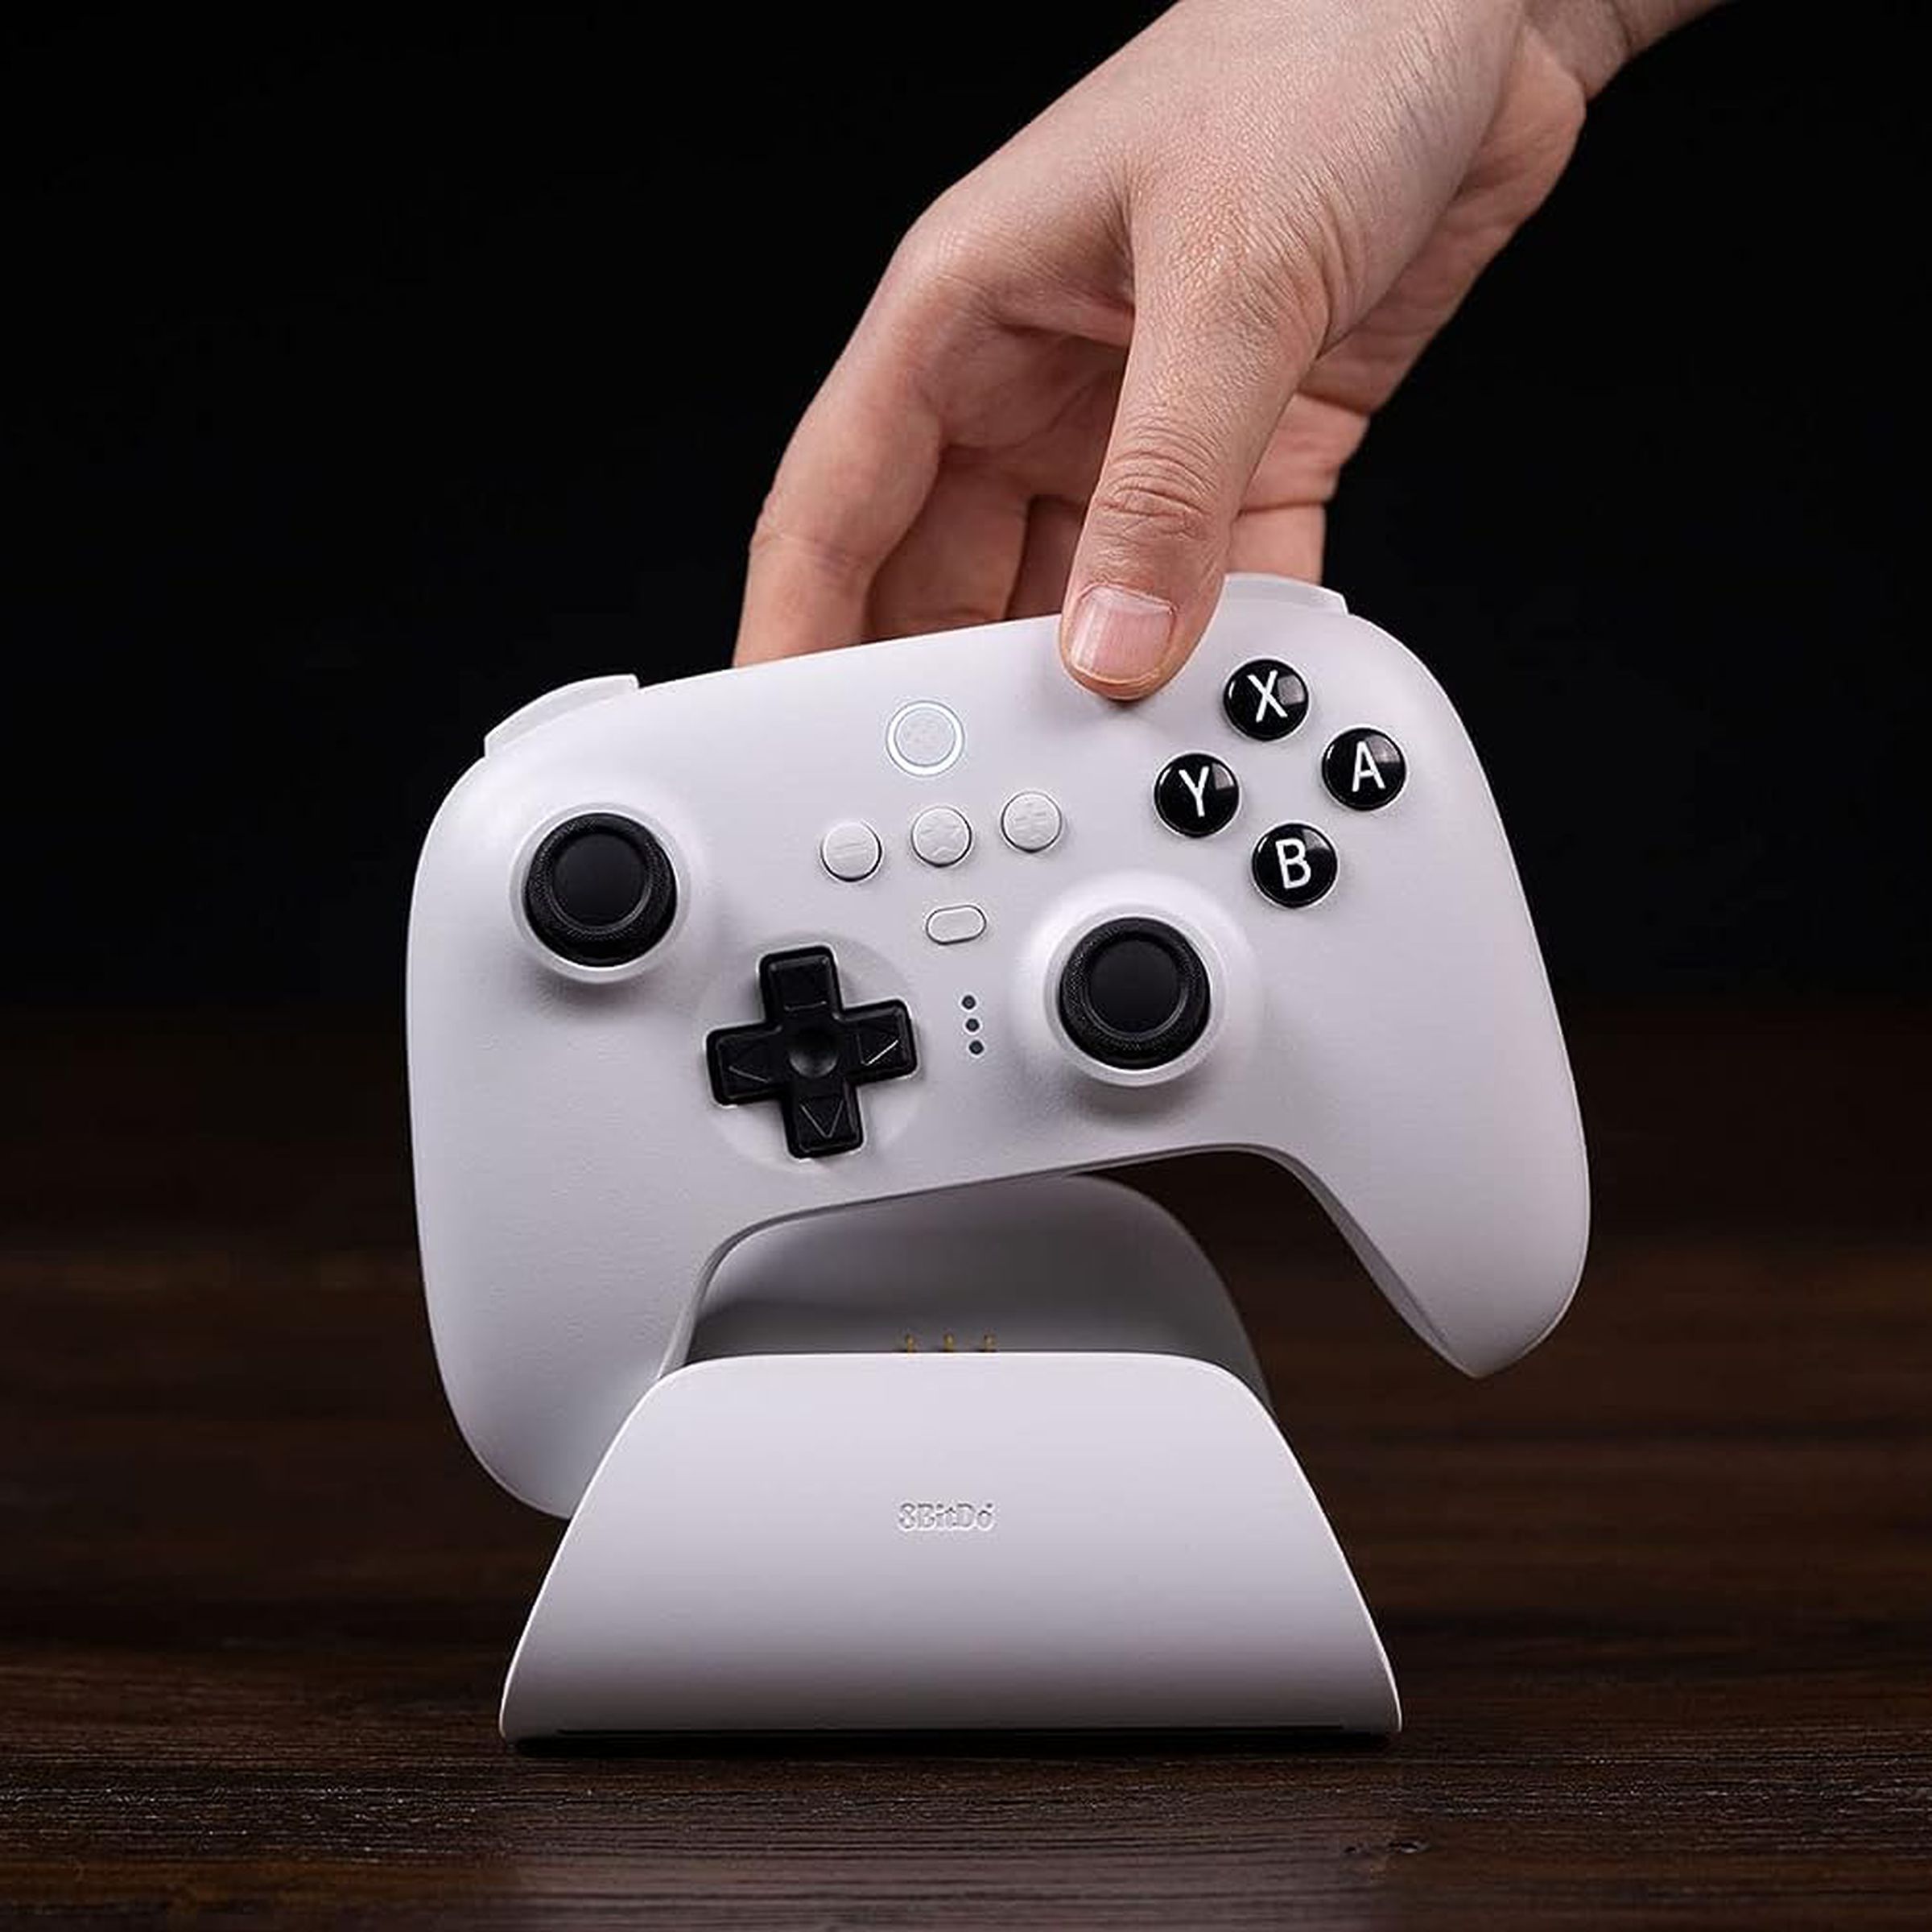 A hand picking up the white 8BitDo Ultimate Bluetooth Controller from its charging cradle.